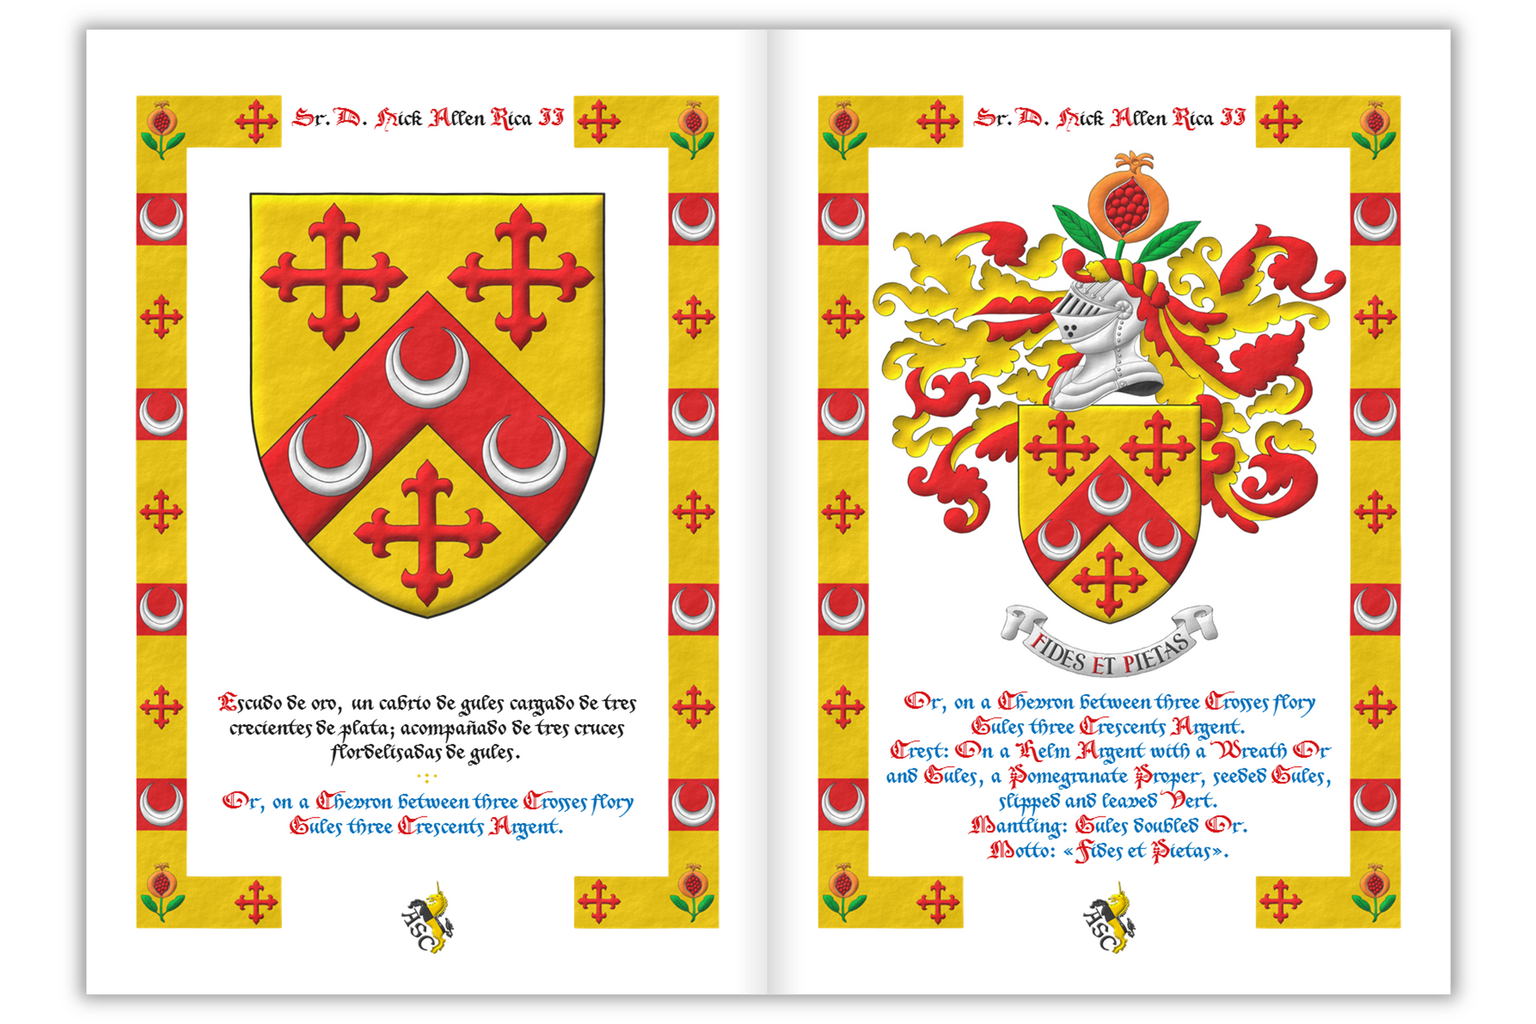 2 pages of the heraldic document of Nick Allen Rica II with his coat of arms emblazoned by me. The pages have a heraldic frame with the elements of his coat of arms.